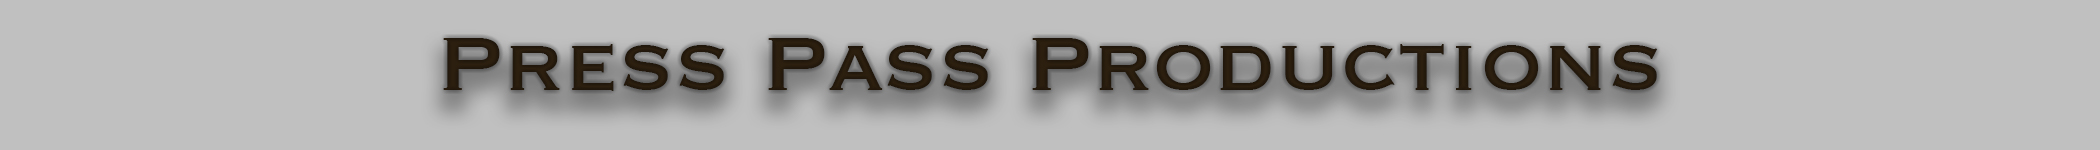 Press Pass Productions